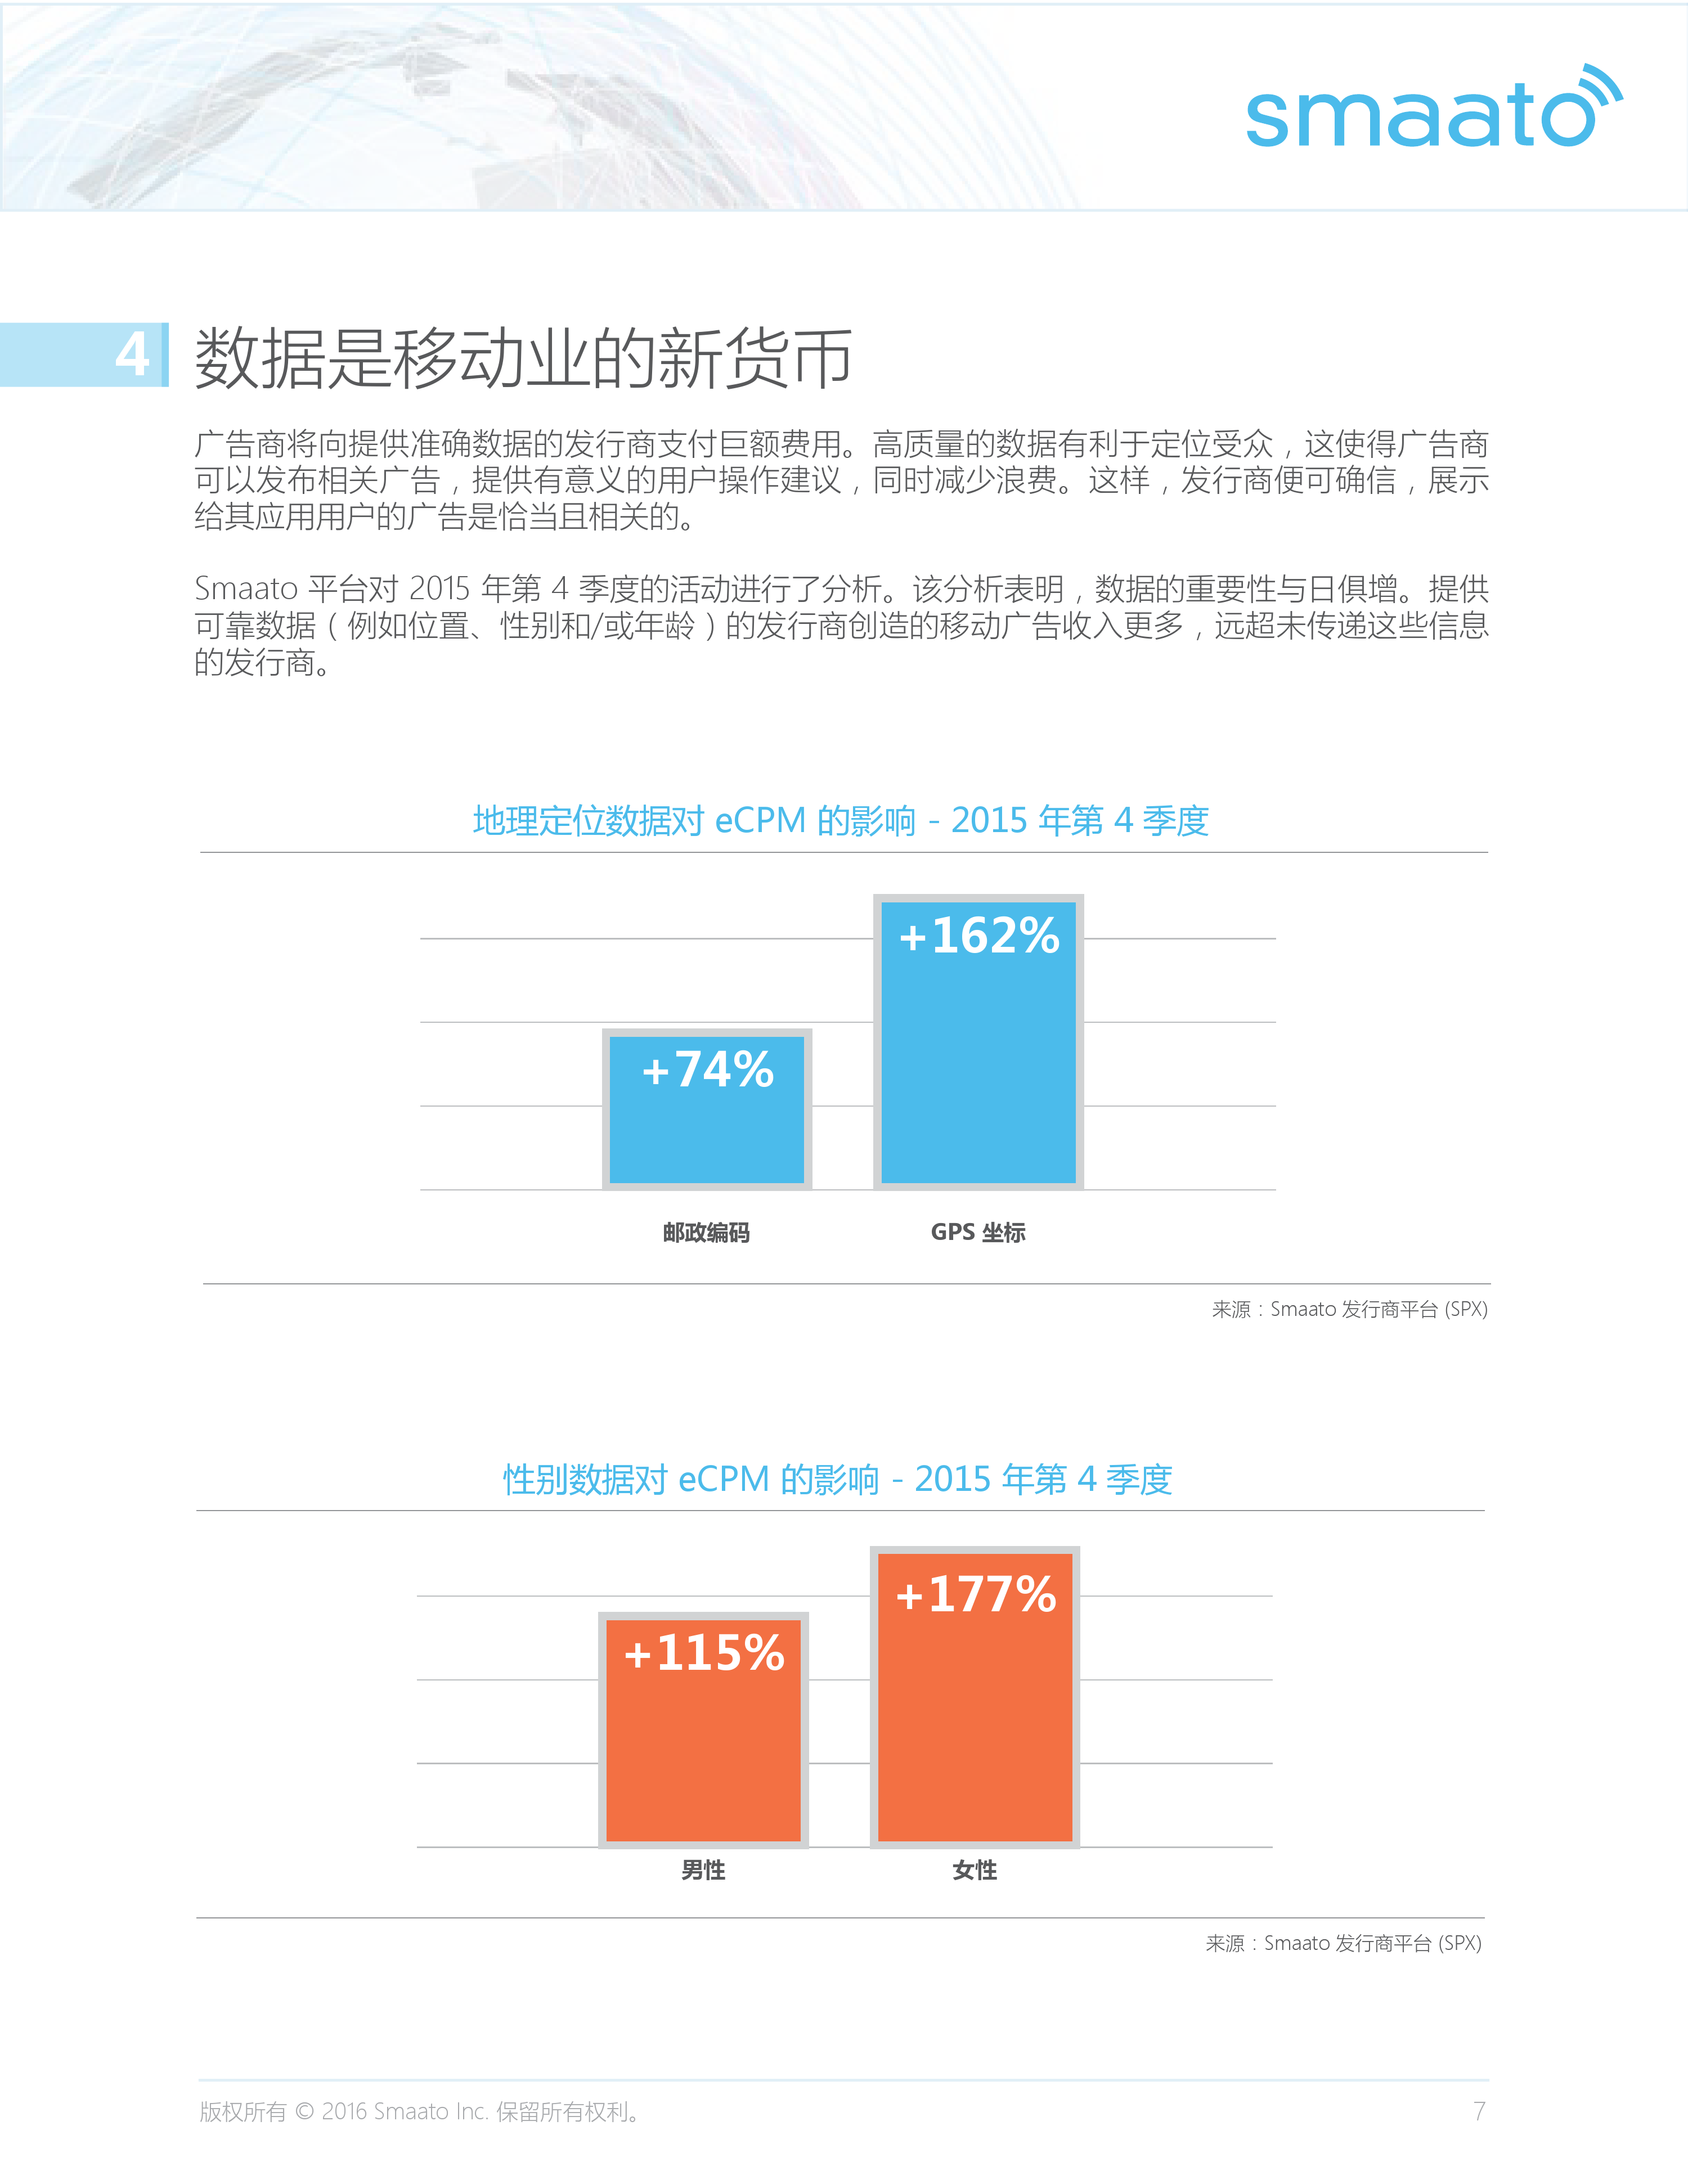 Smaato_Global_Trends_in_Mobile_Advertising_Report_Q4_2015_CN_000008